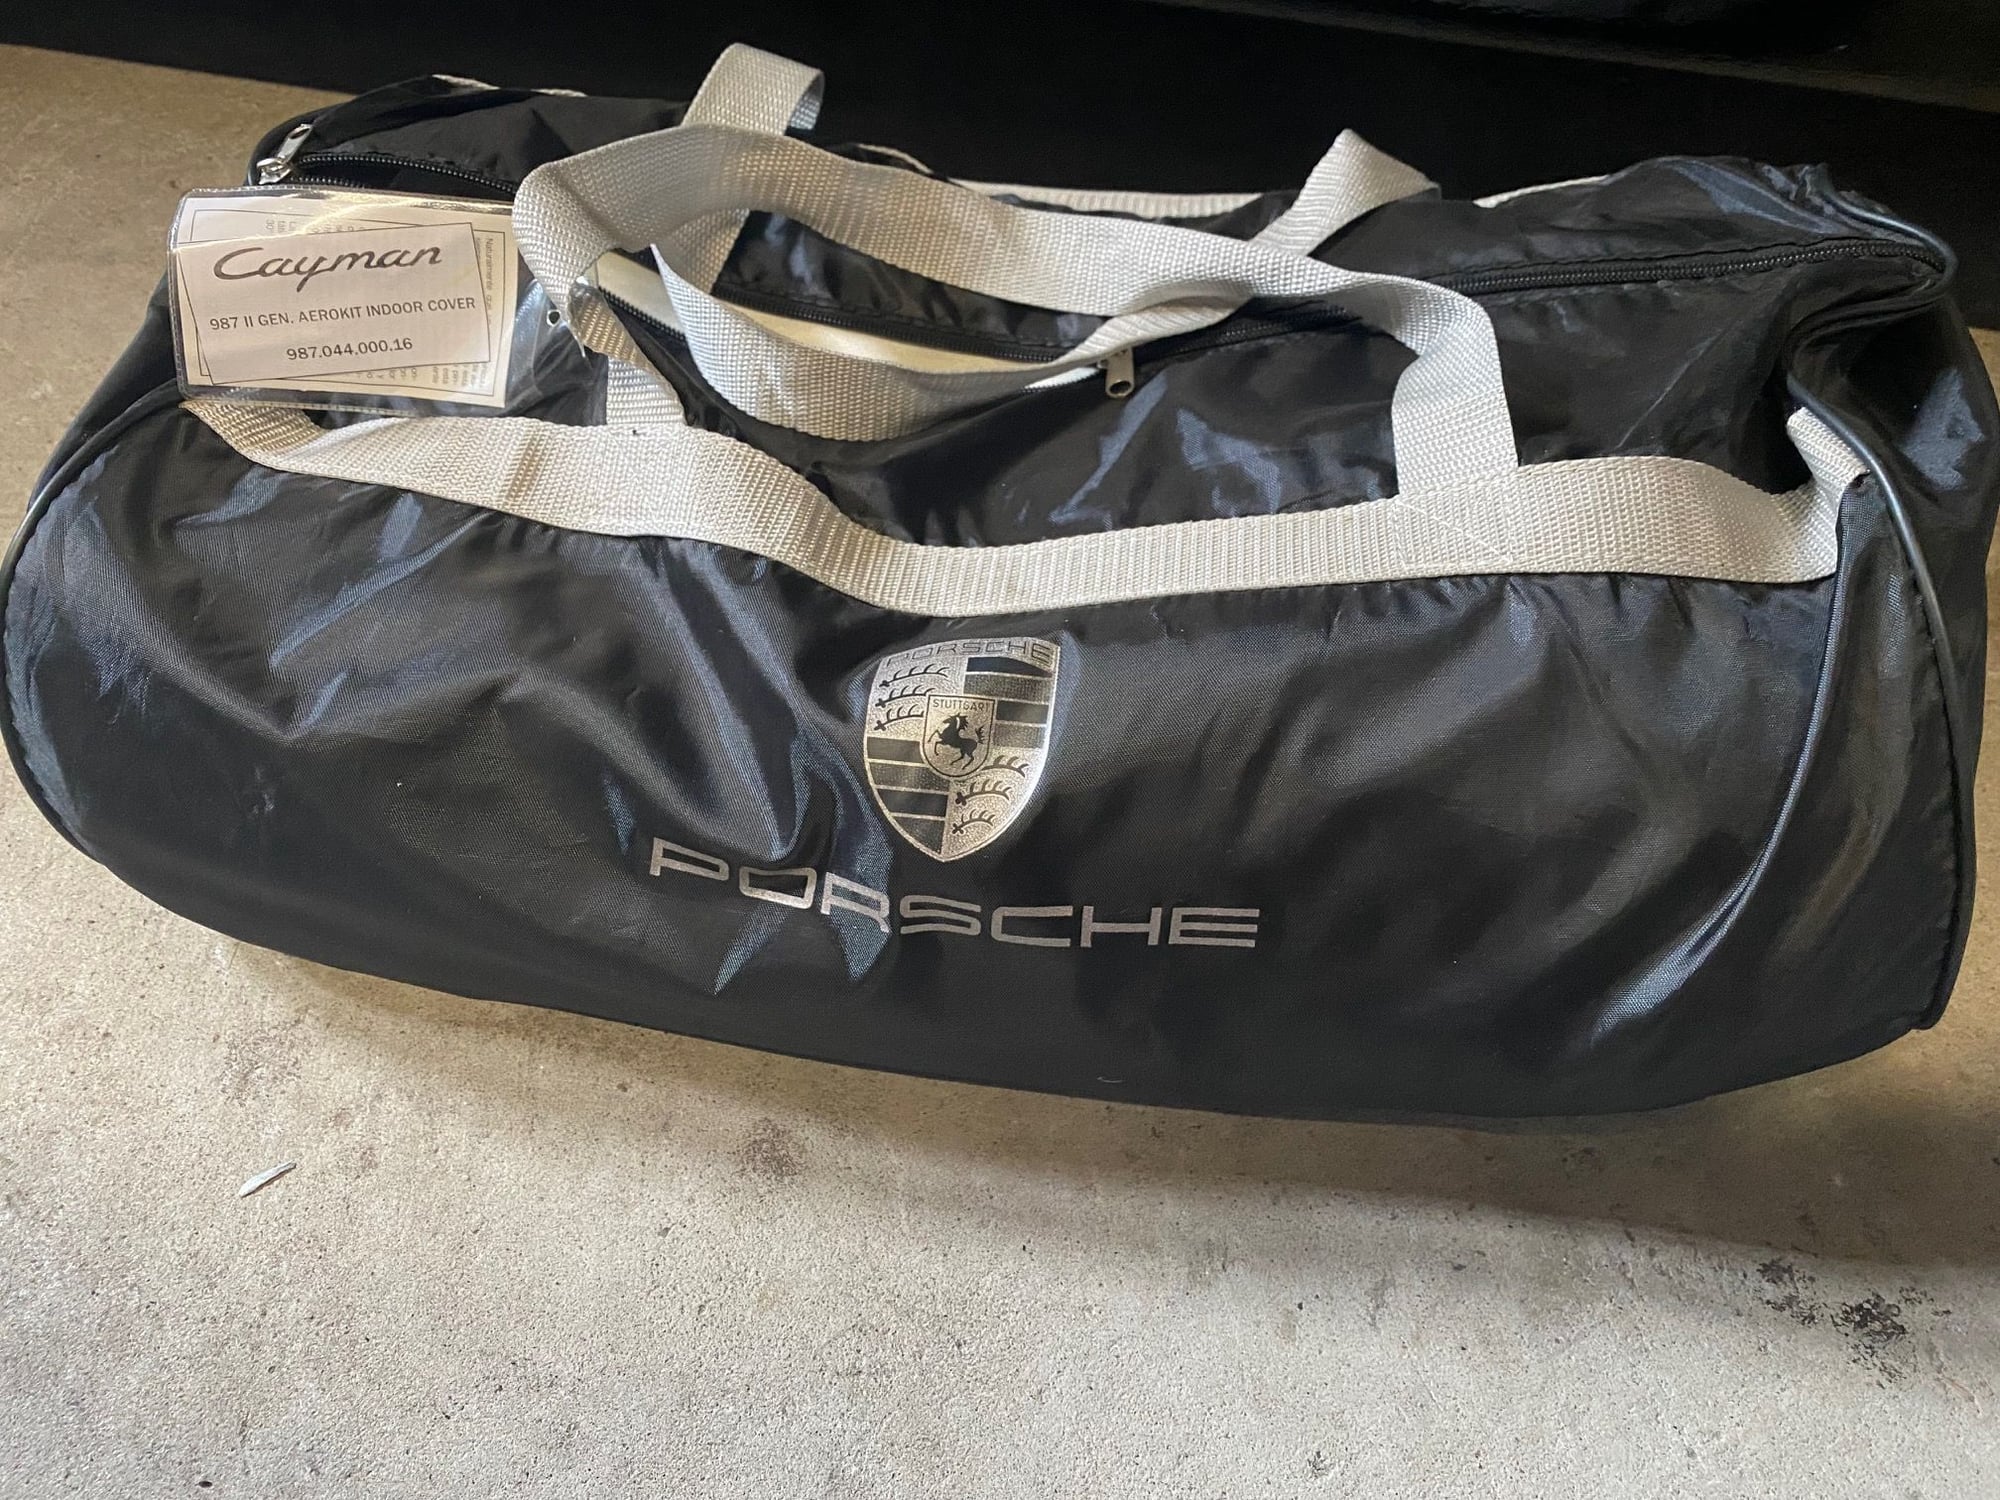 2010 Porsche Cayman - OEM Indoor Cover - Brand New - Accessories - $160 - Toronto, ON M2R3N1, Canada